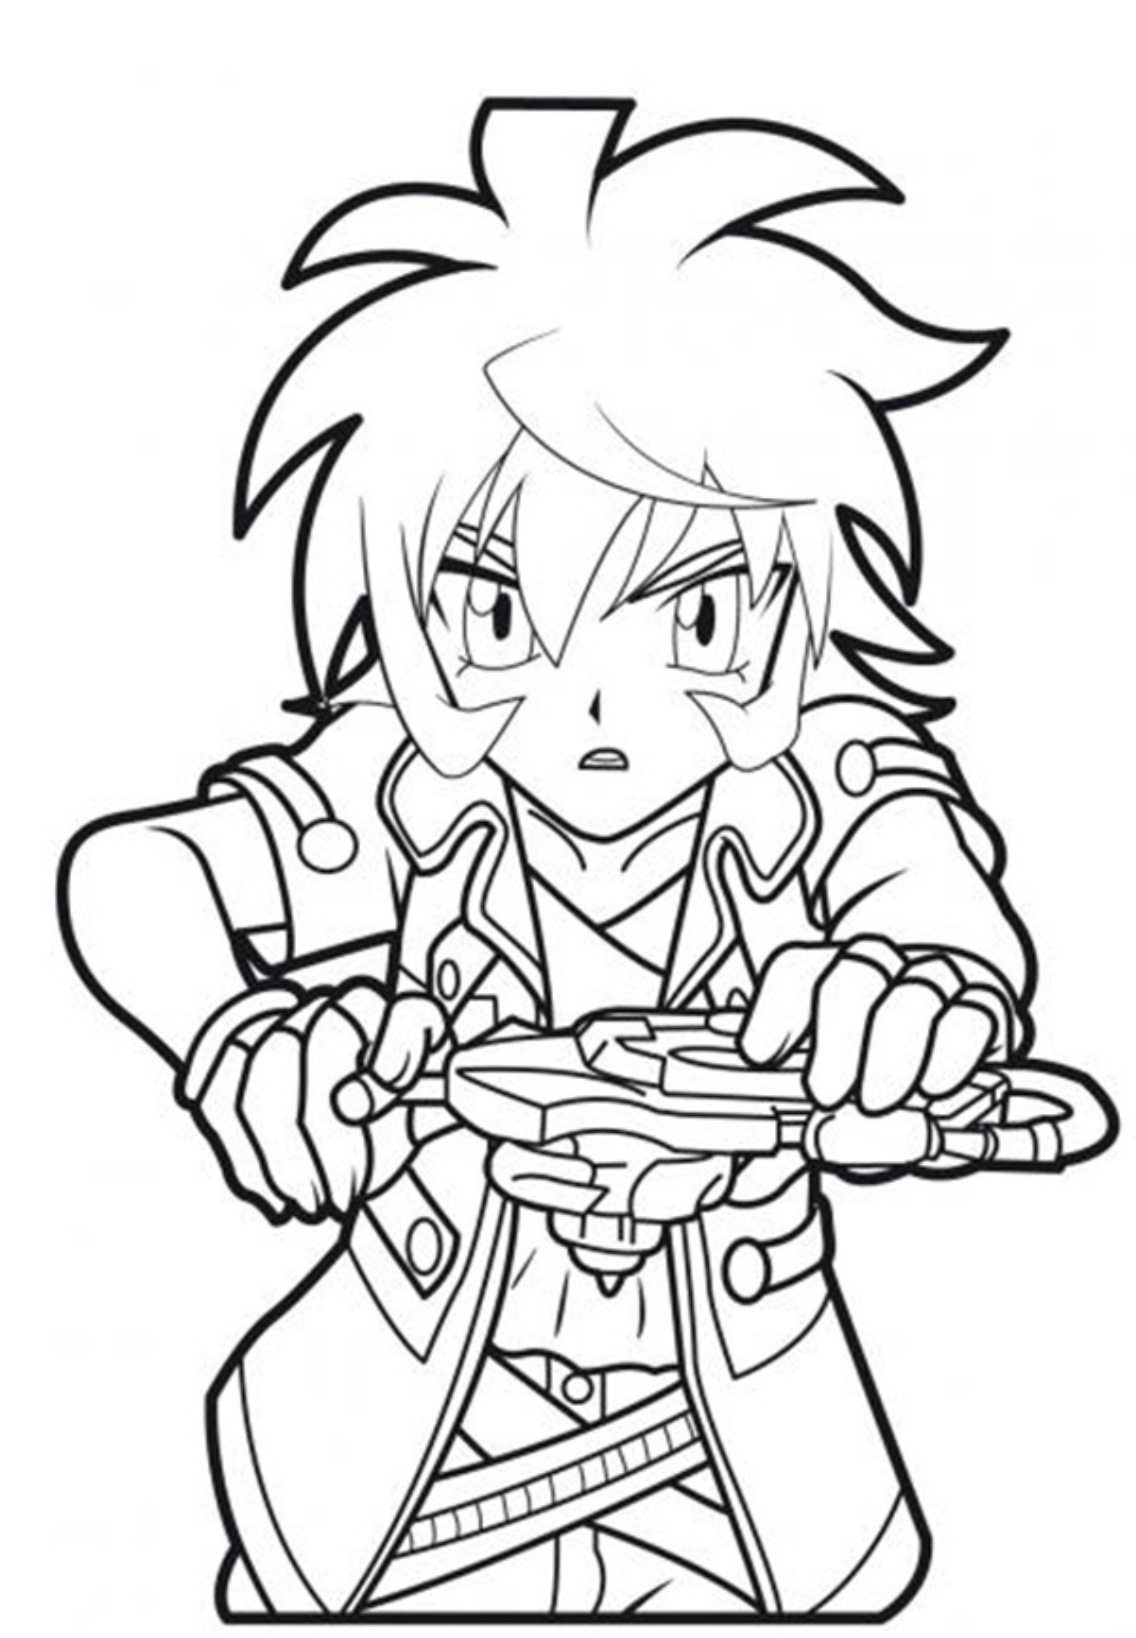 1136x1638 Cartoon Beyblade Coloring Pages Cartoon Coloring pages of